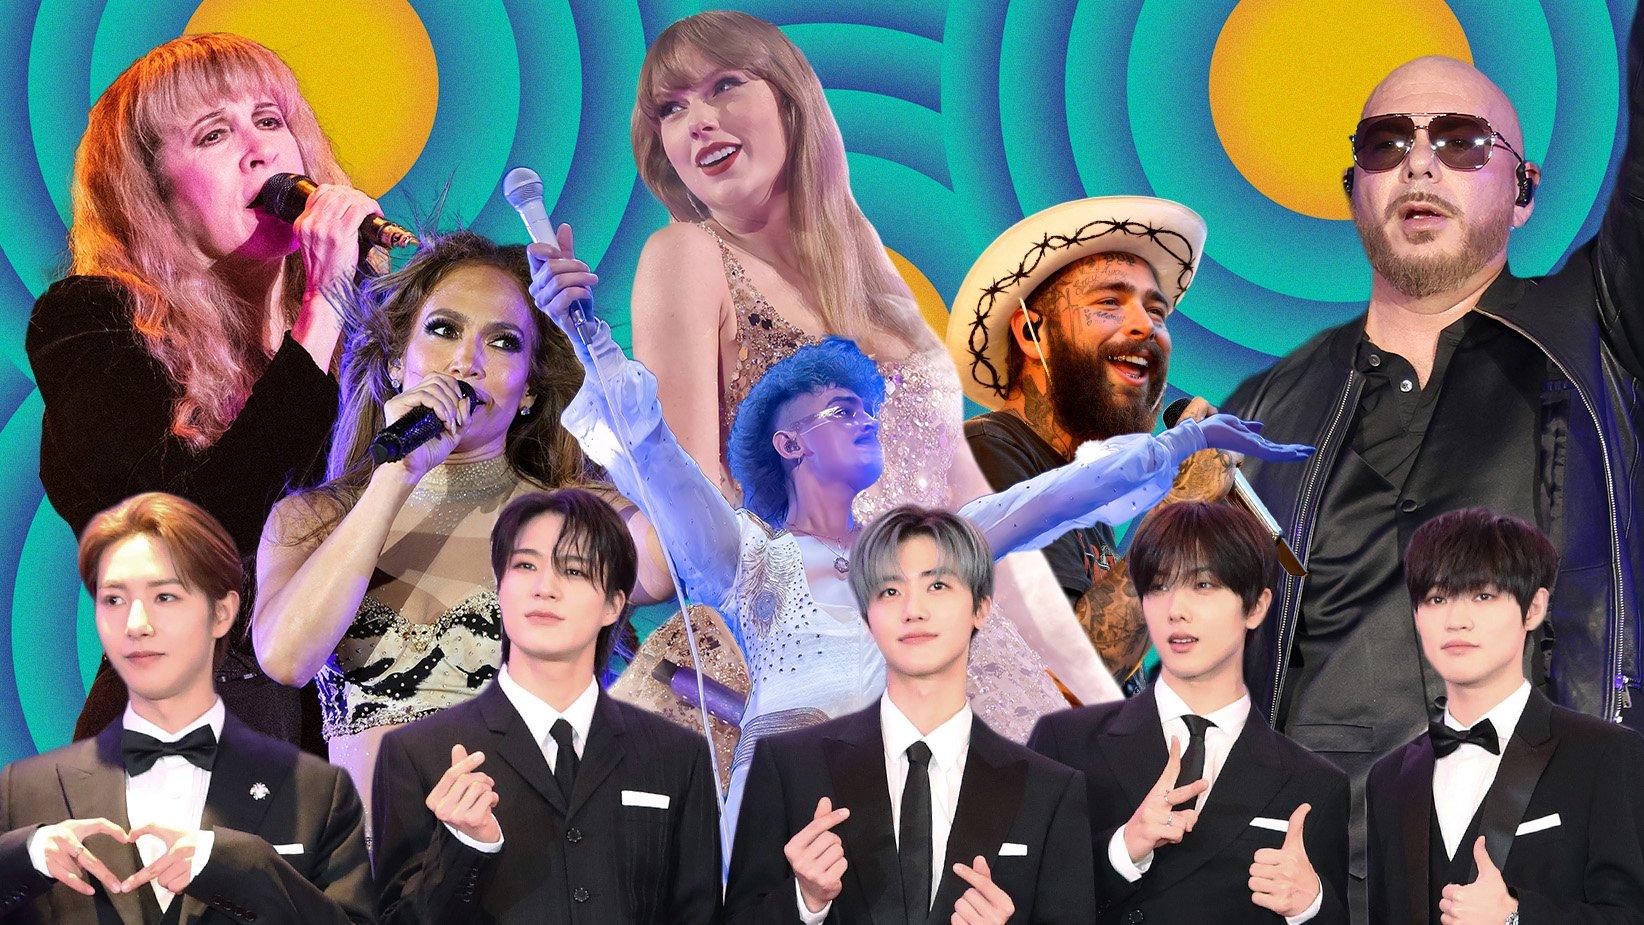 15 Must-Hear Albums This July Taylor Swift, Dominic Fike, Post Malone, NCT Dream and More GRAMMY